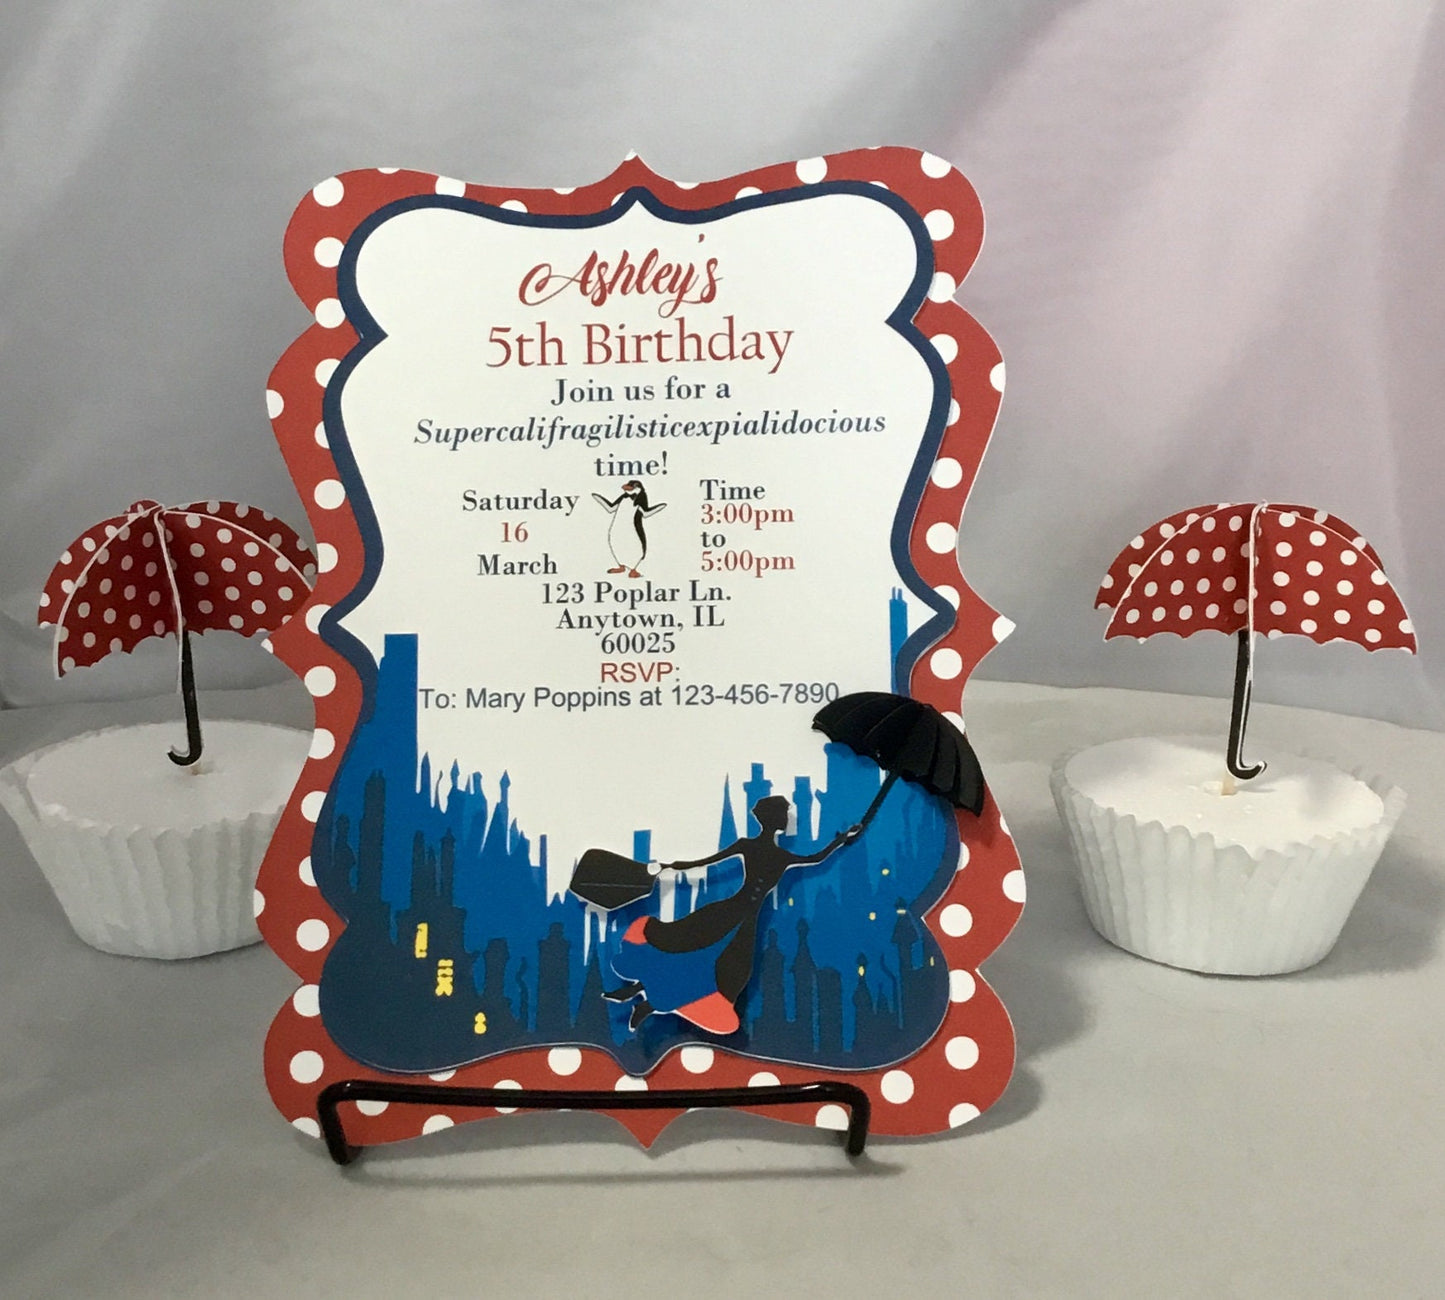 Mary Poppins Inspired Invitations/Personalized Mary Poppins Invites/12 Invitations with envelopes